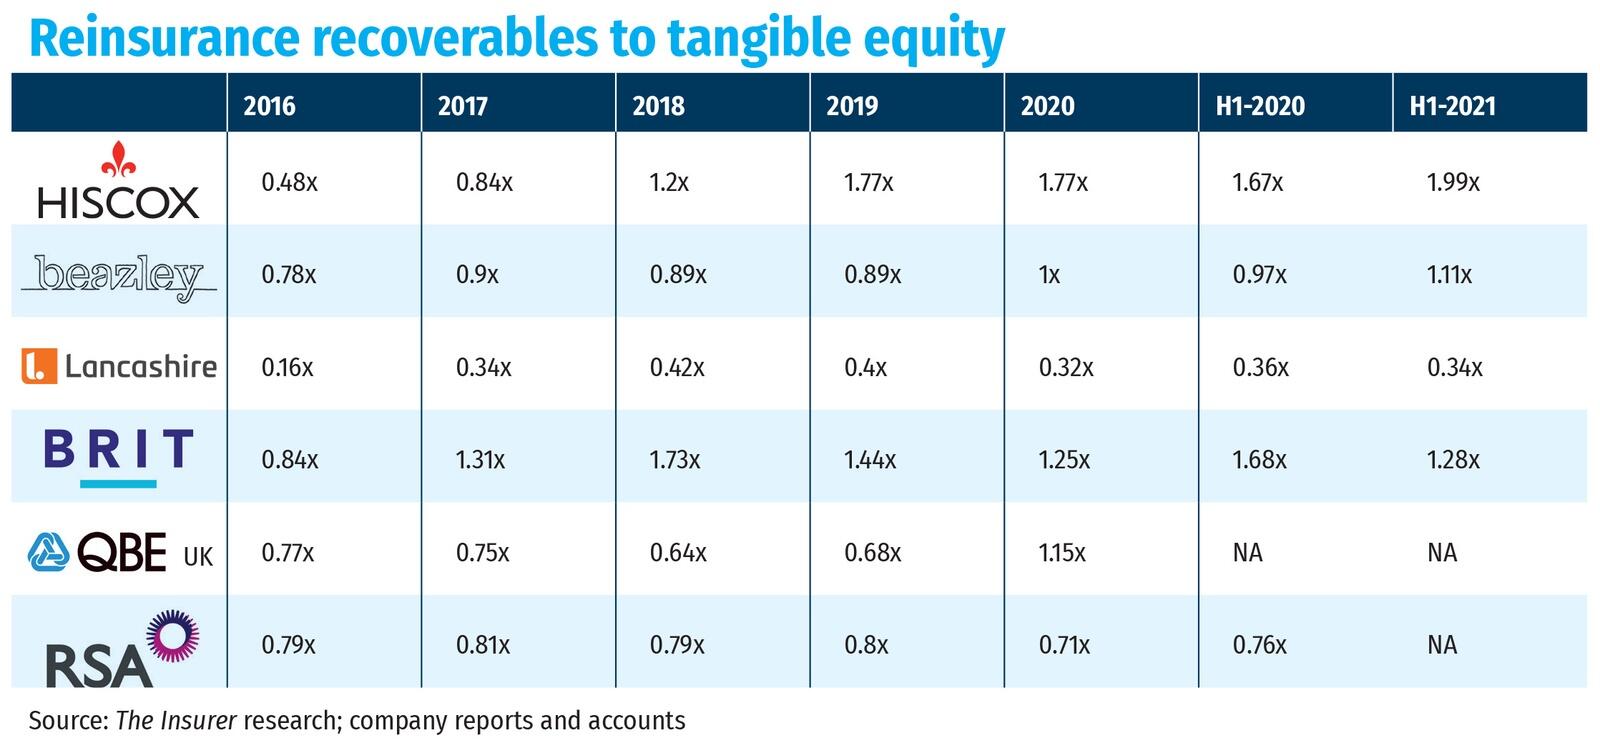 Reinsurance recoverables to tangible equity